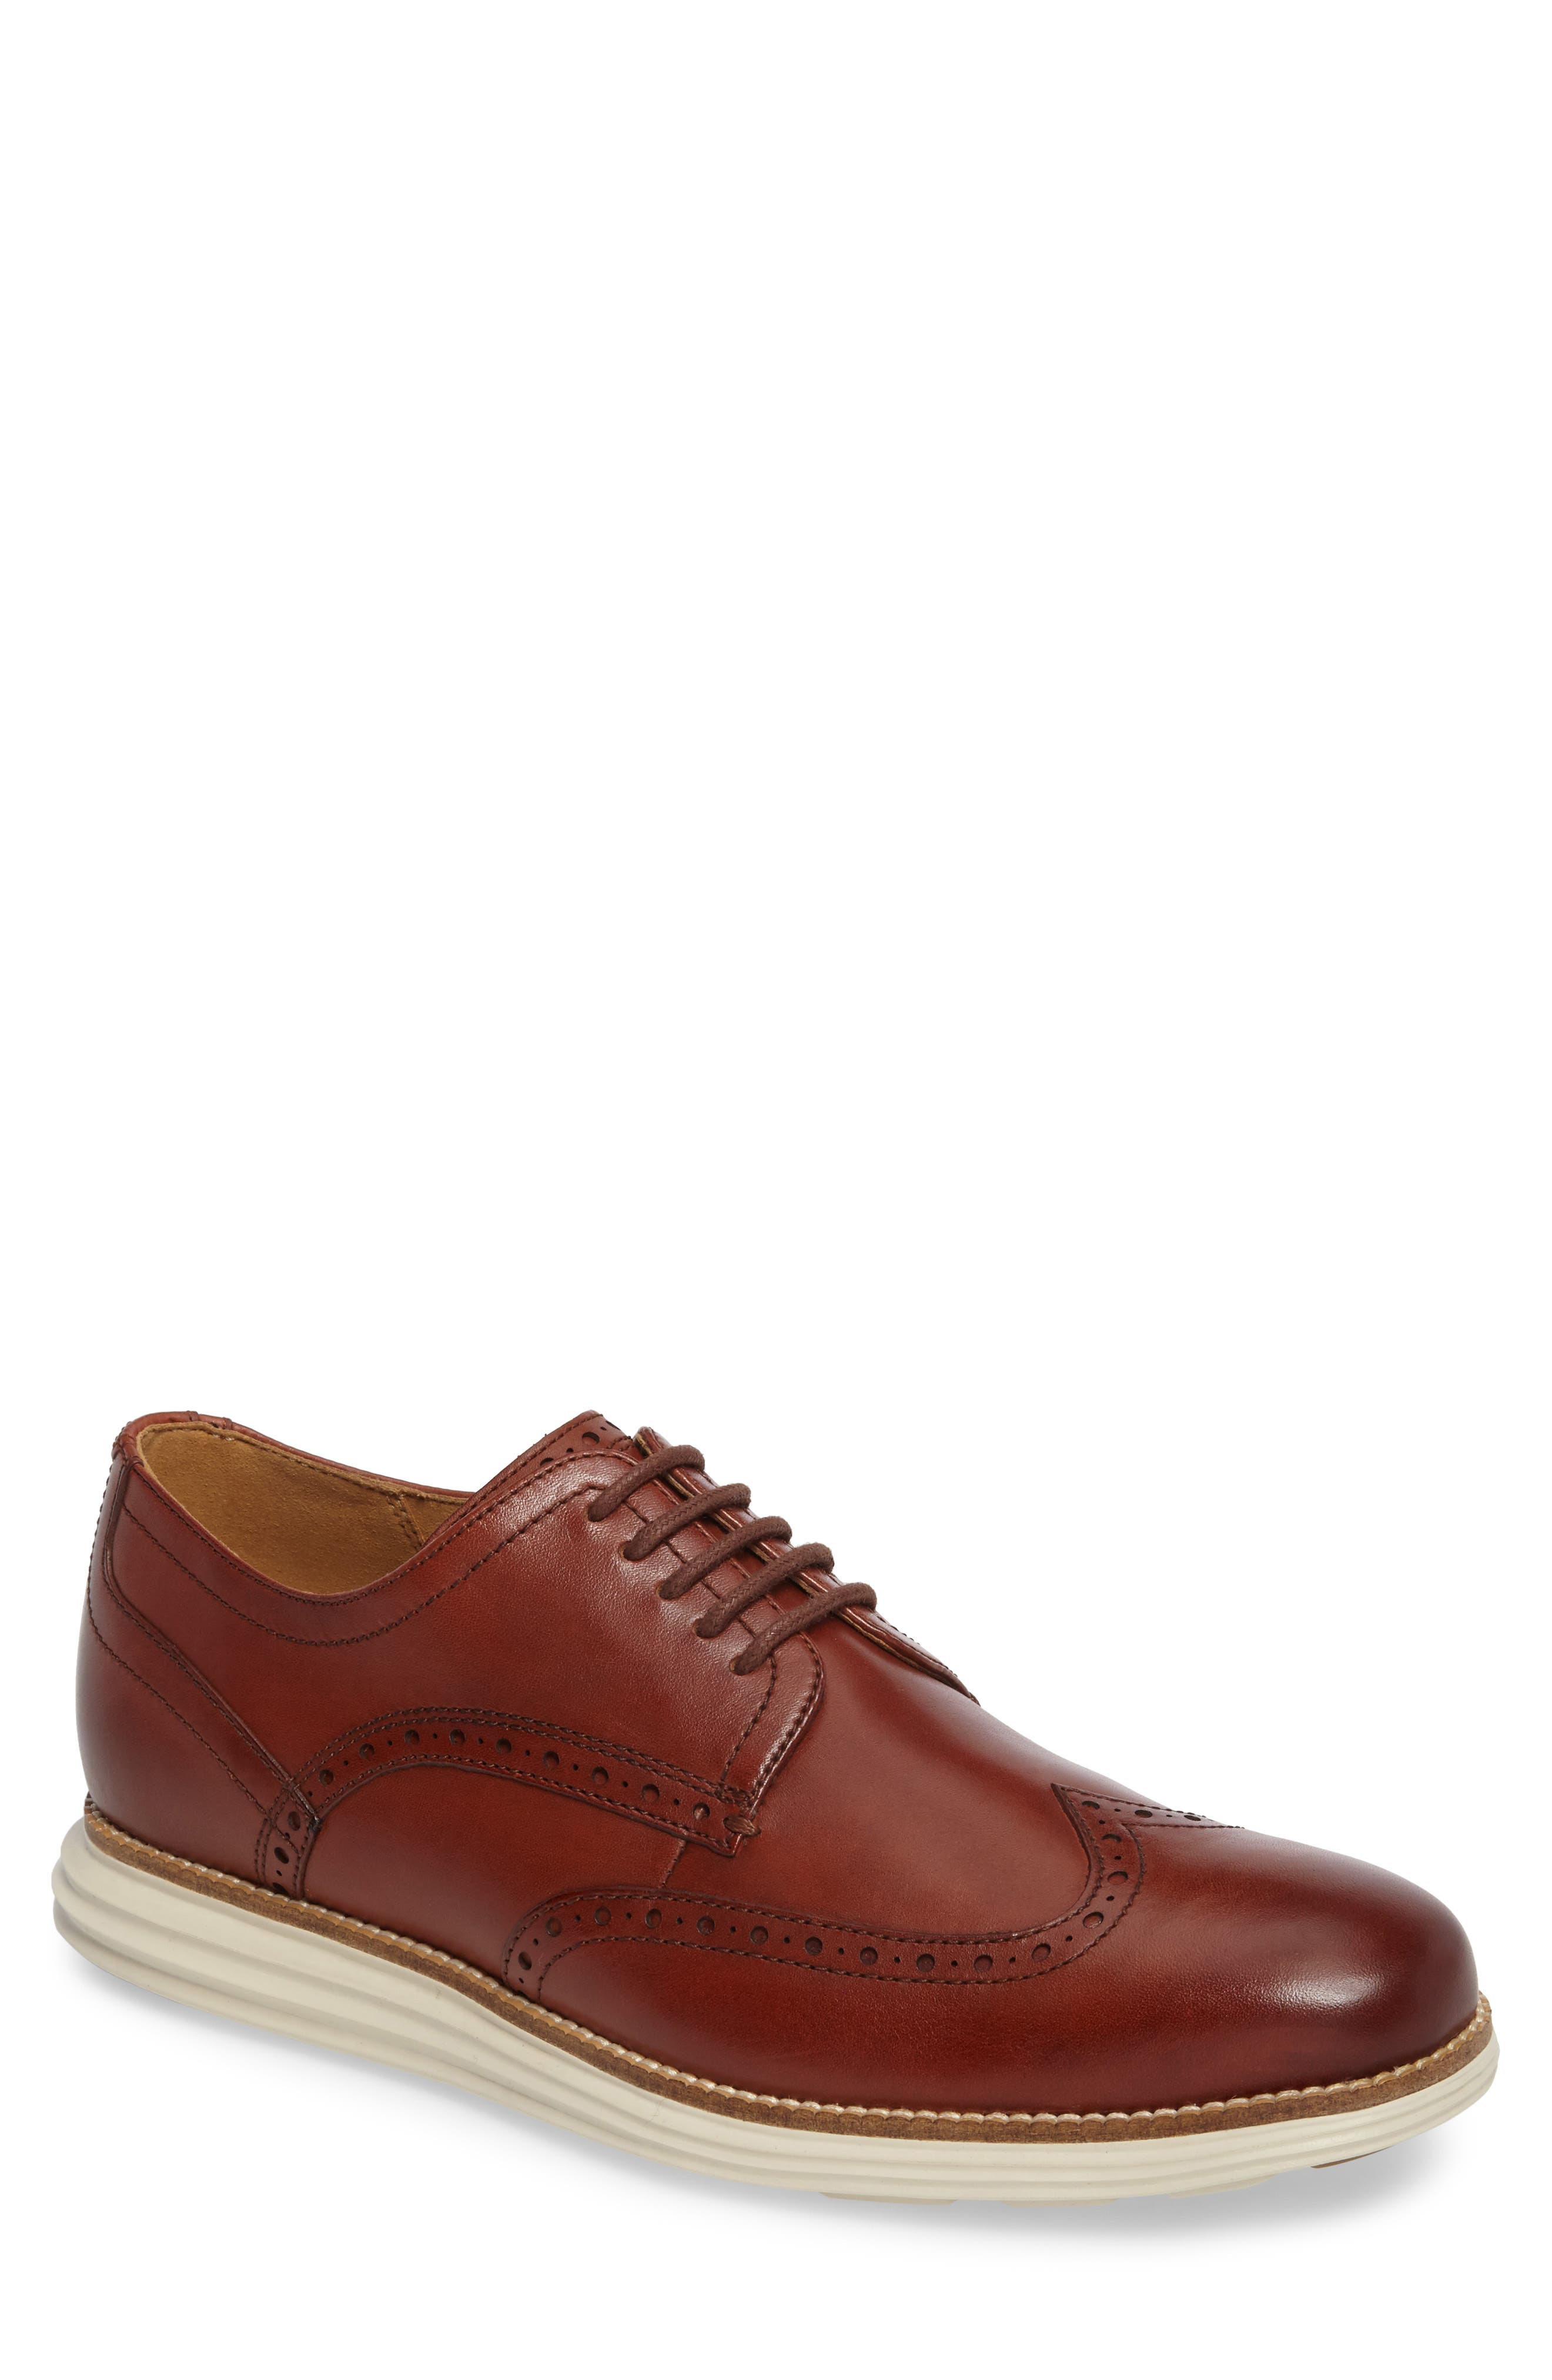 cole haan shoes sale clearance